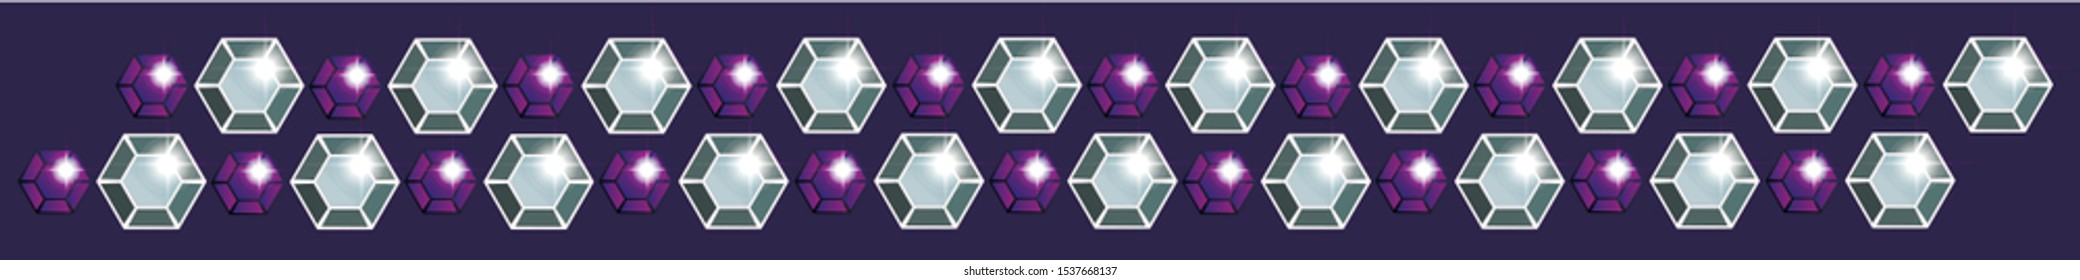 Seamless border of violet and blue shiny rhinestones on a dark violet background. Border - stripe for decoration with precious stones - vector element.